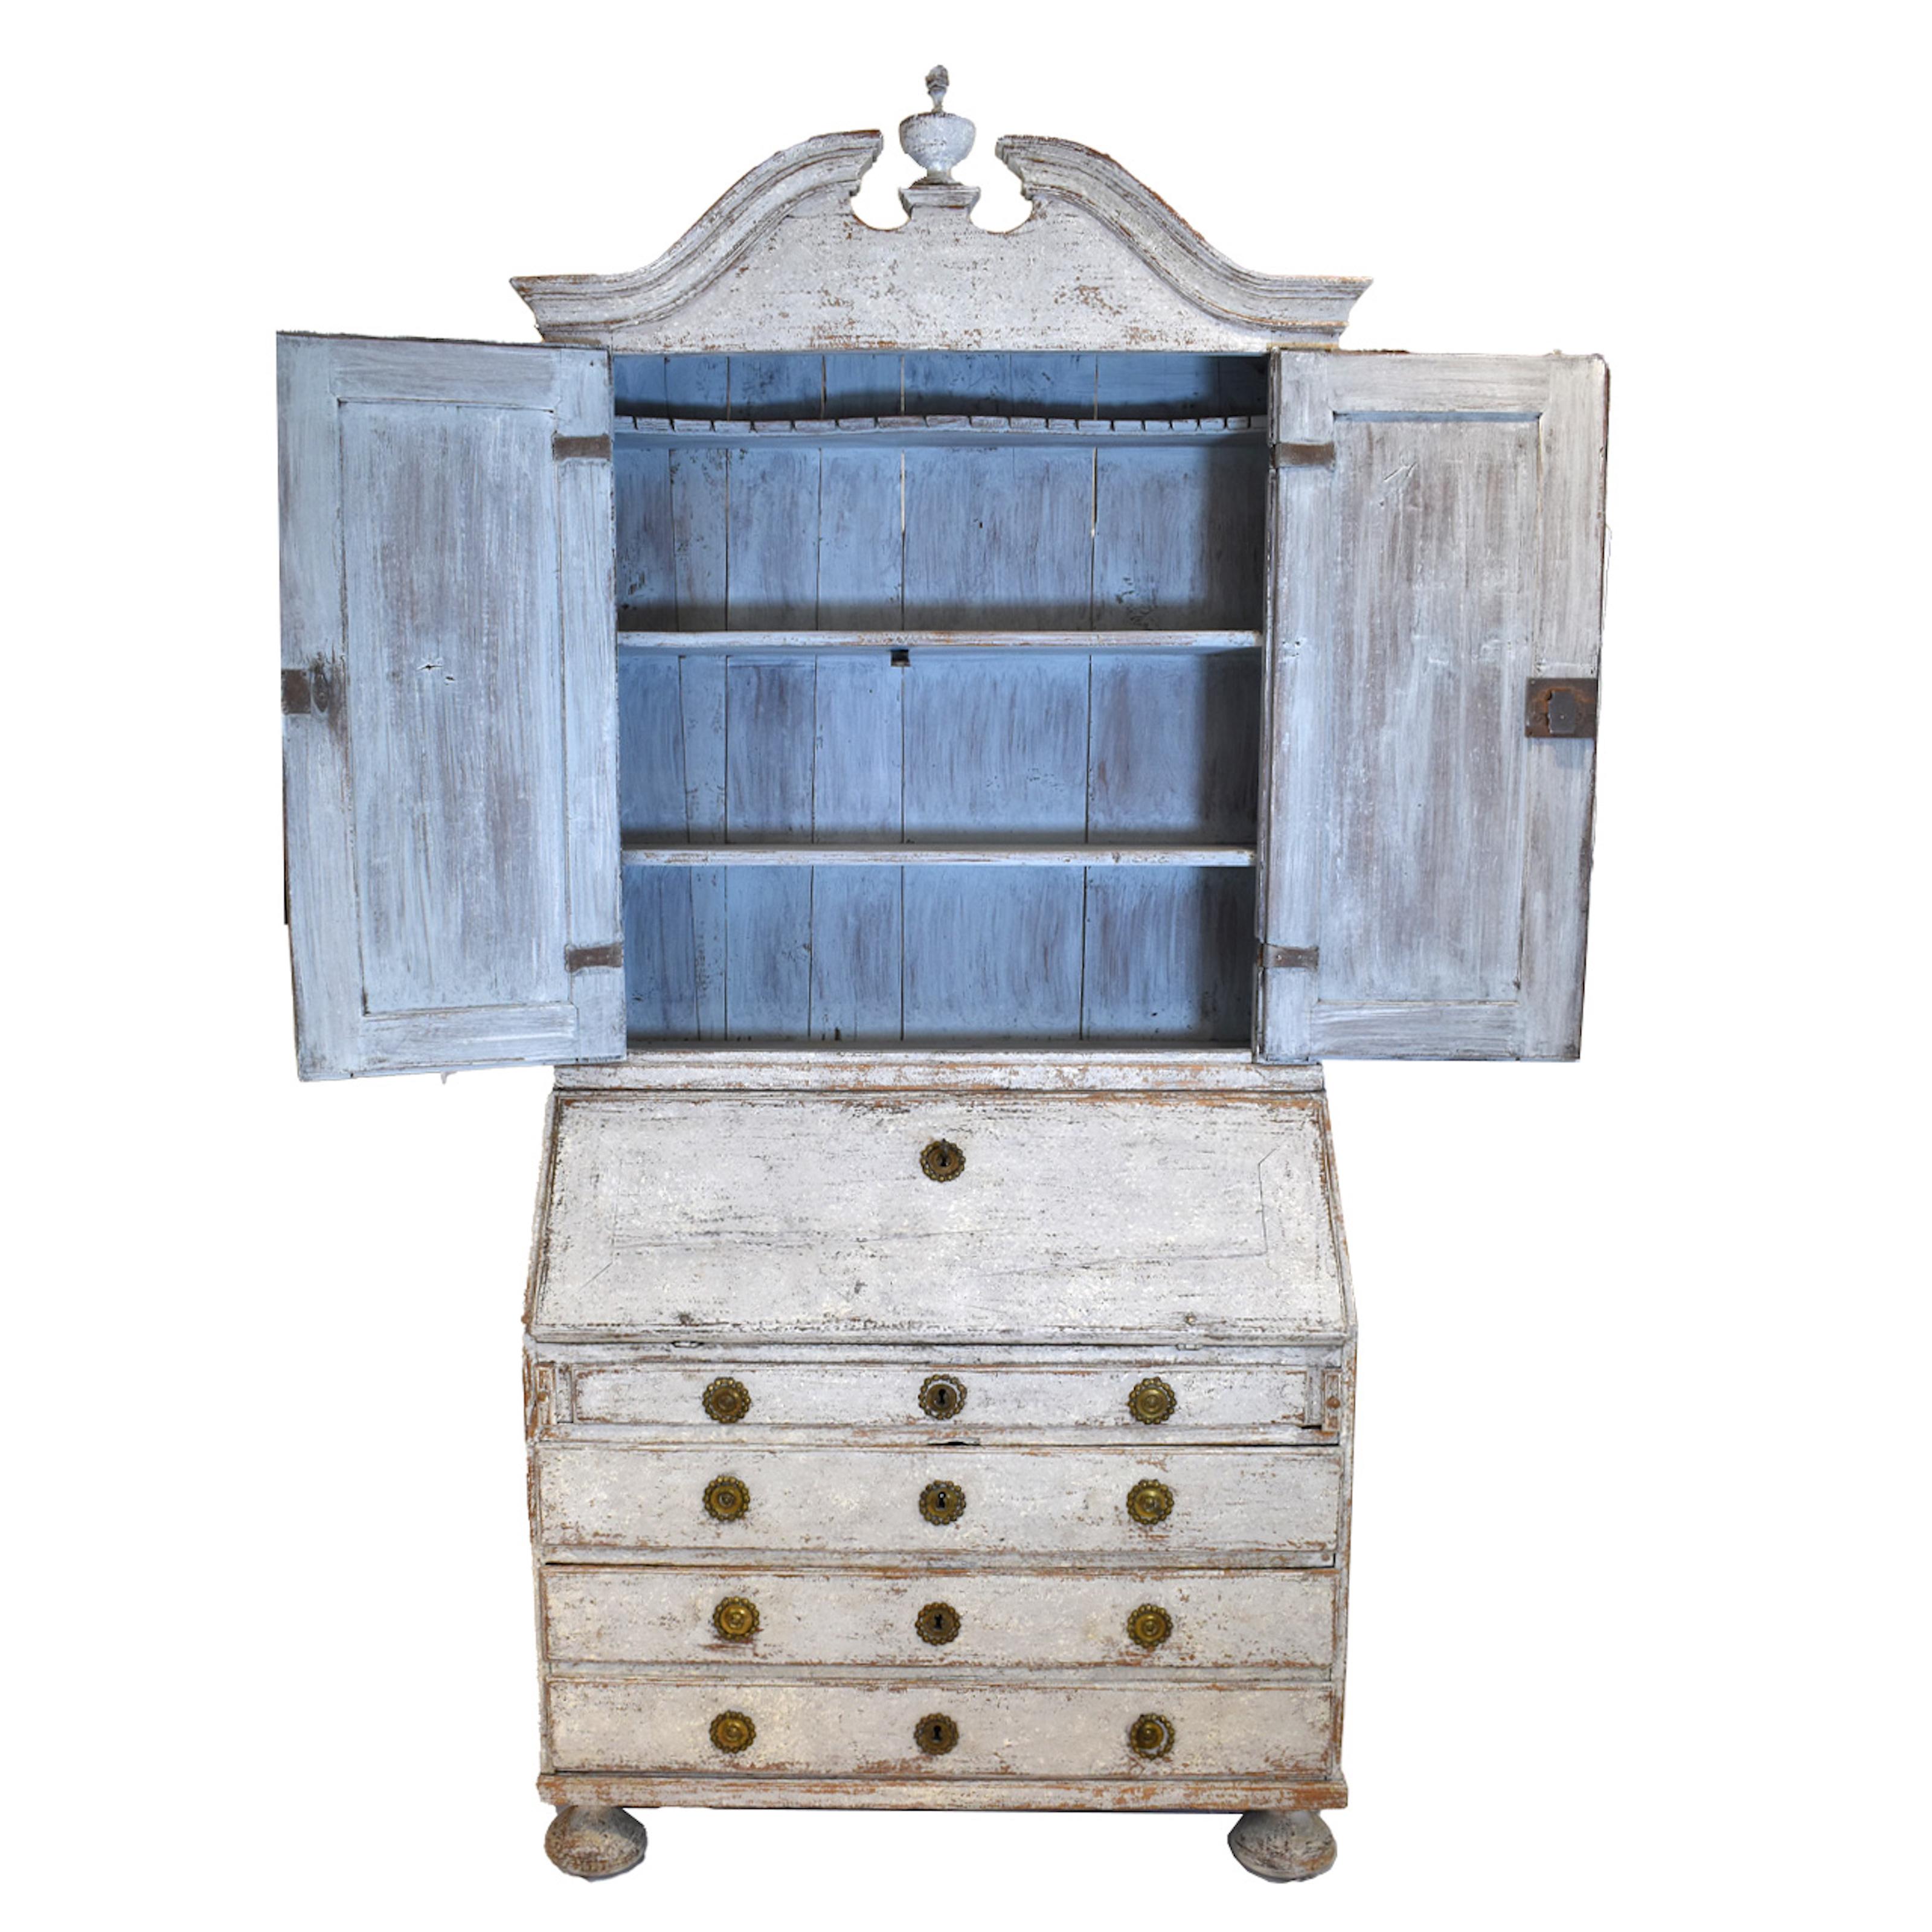 Paying bills is almost inspirational at the Swedish Secretaire! Graceful curved crown atop beautifully faded patina, surely a hero piece of the room. Charming light blue painted cabinet interior.